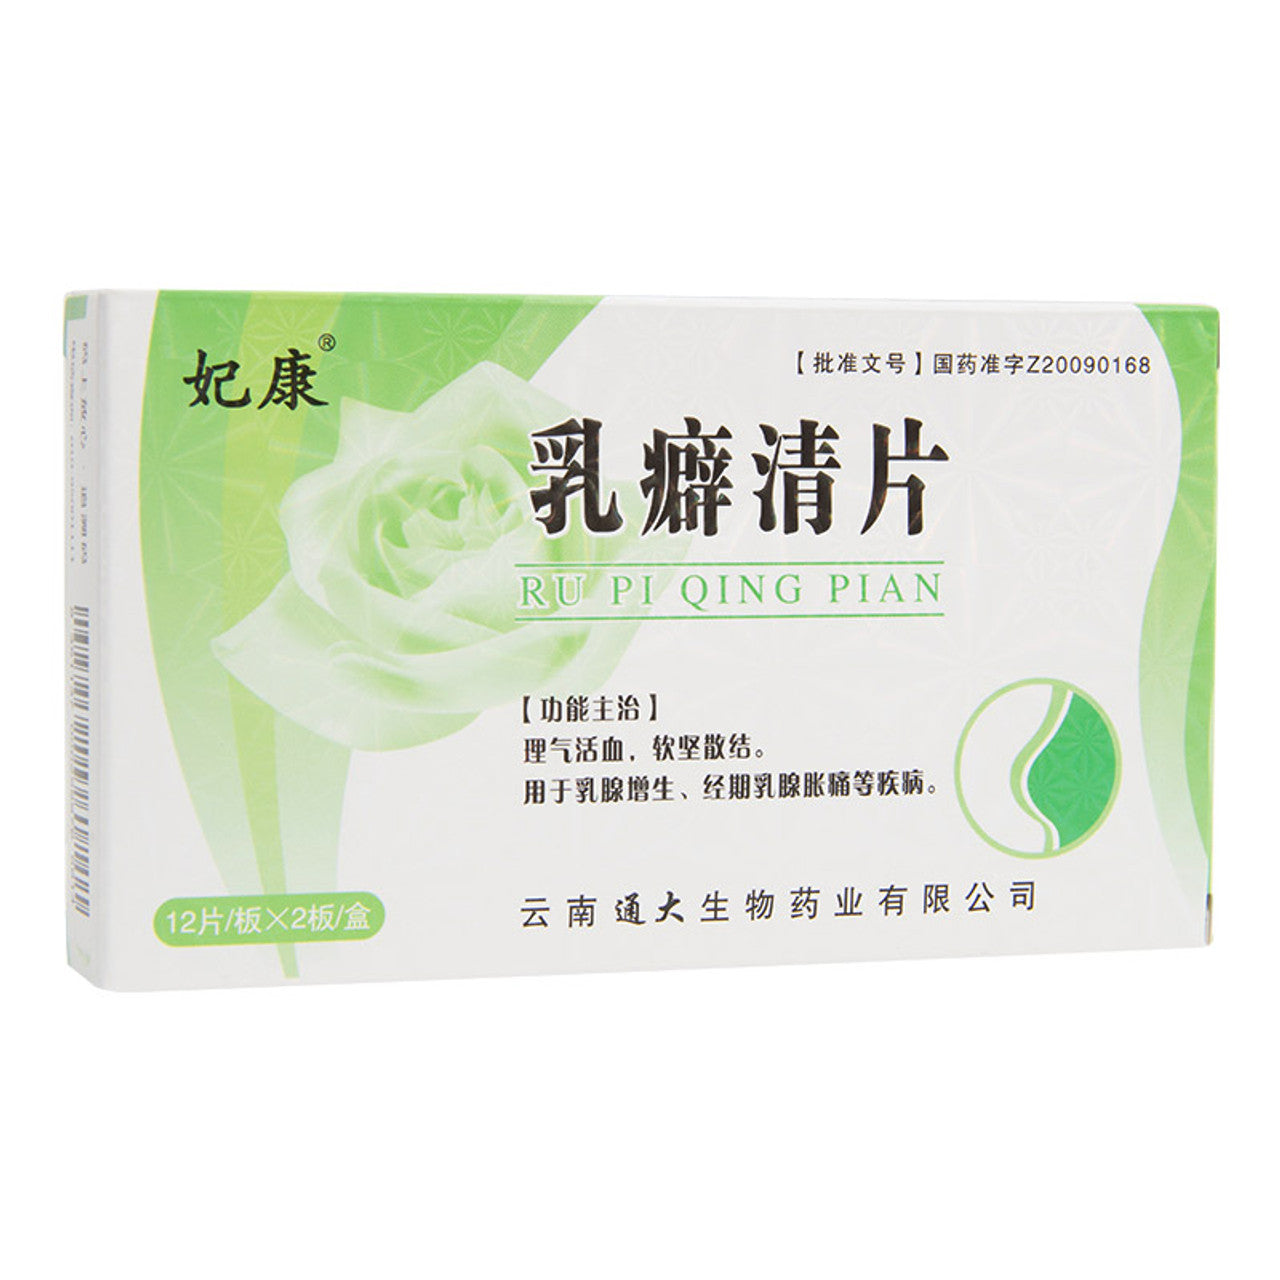 China Herb. Pupiqing Pian / Rupiqing Tablets / Ru Pi Qing Pian  Regulate qi and promote blood circulation, soften firmness and dispel lumps Used for breast hyperplasia, breast tenderness during menstruation and other diseases.